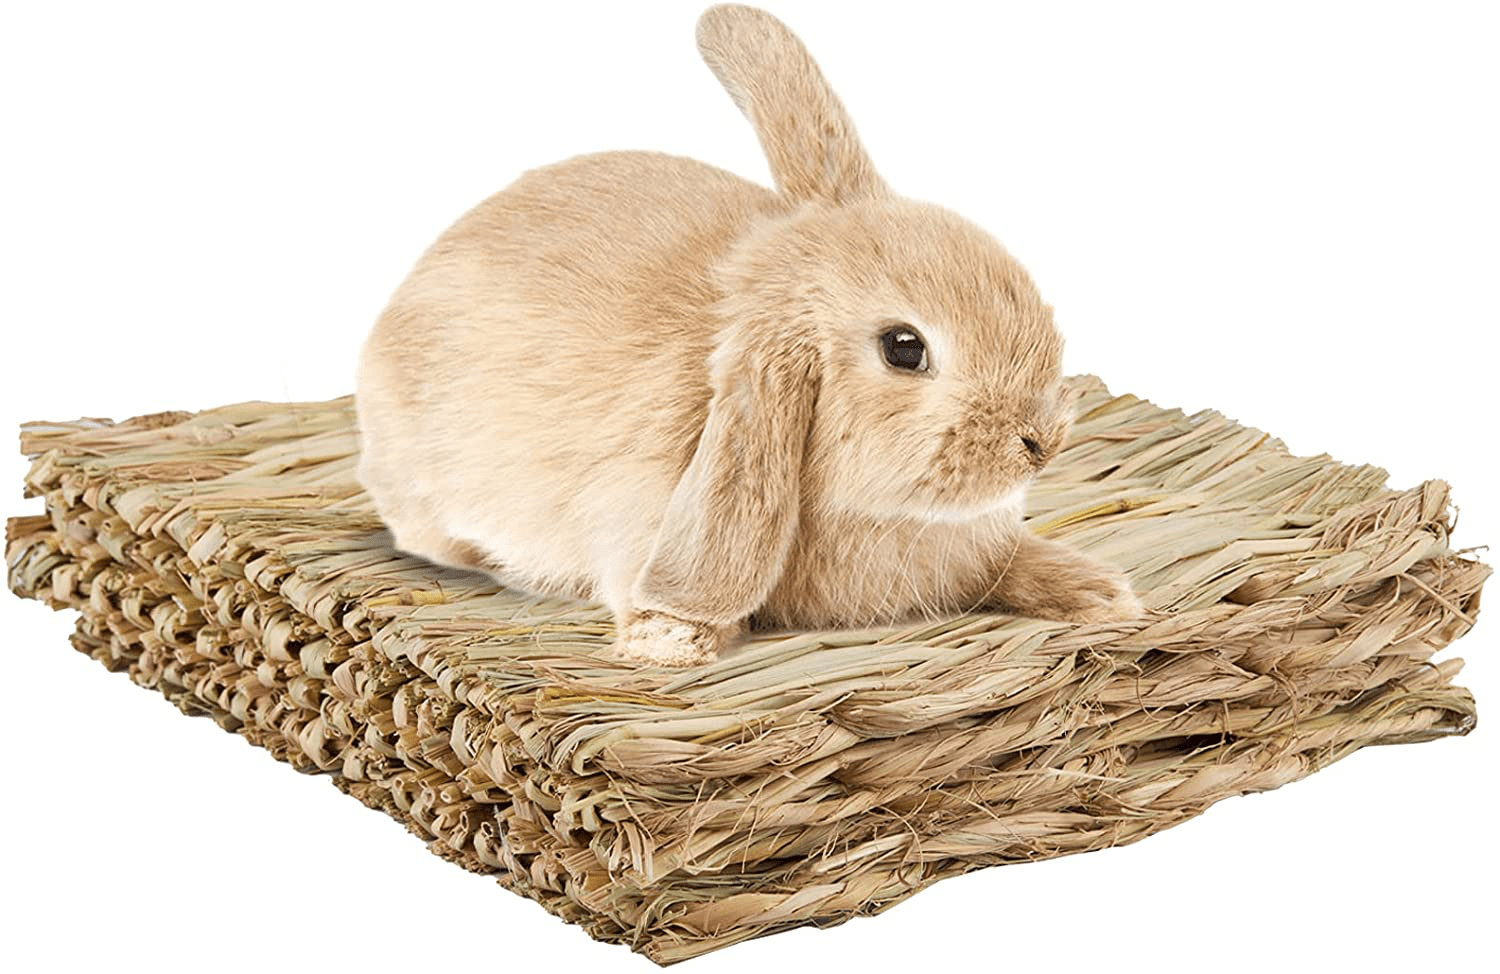 4Pack Grass Mat for Rabbits Bunny Straw Woven Bed Bedding Nest Chew Toy for Guinea Pigs Chinchilla Hamsters Rats Birds and Other Small Animals 11.8 × 9 Inches